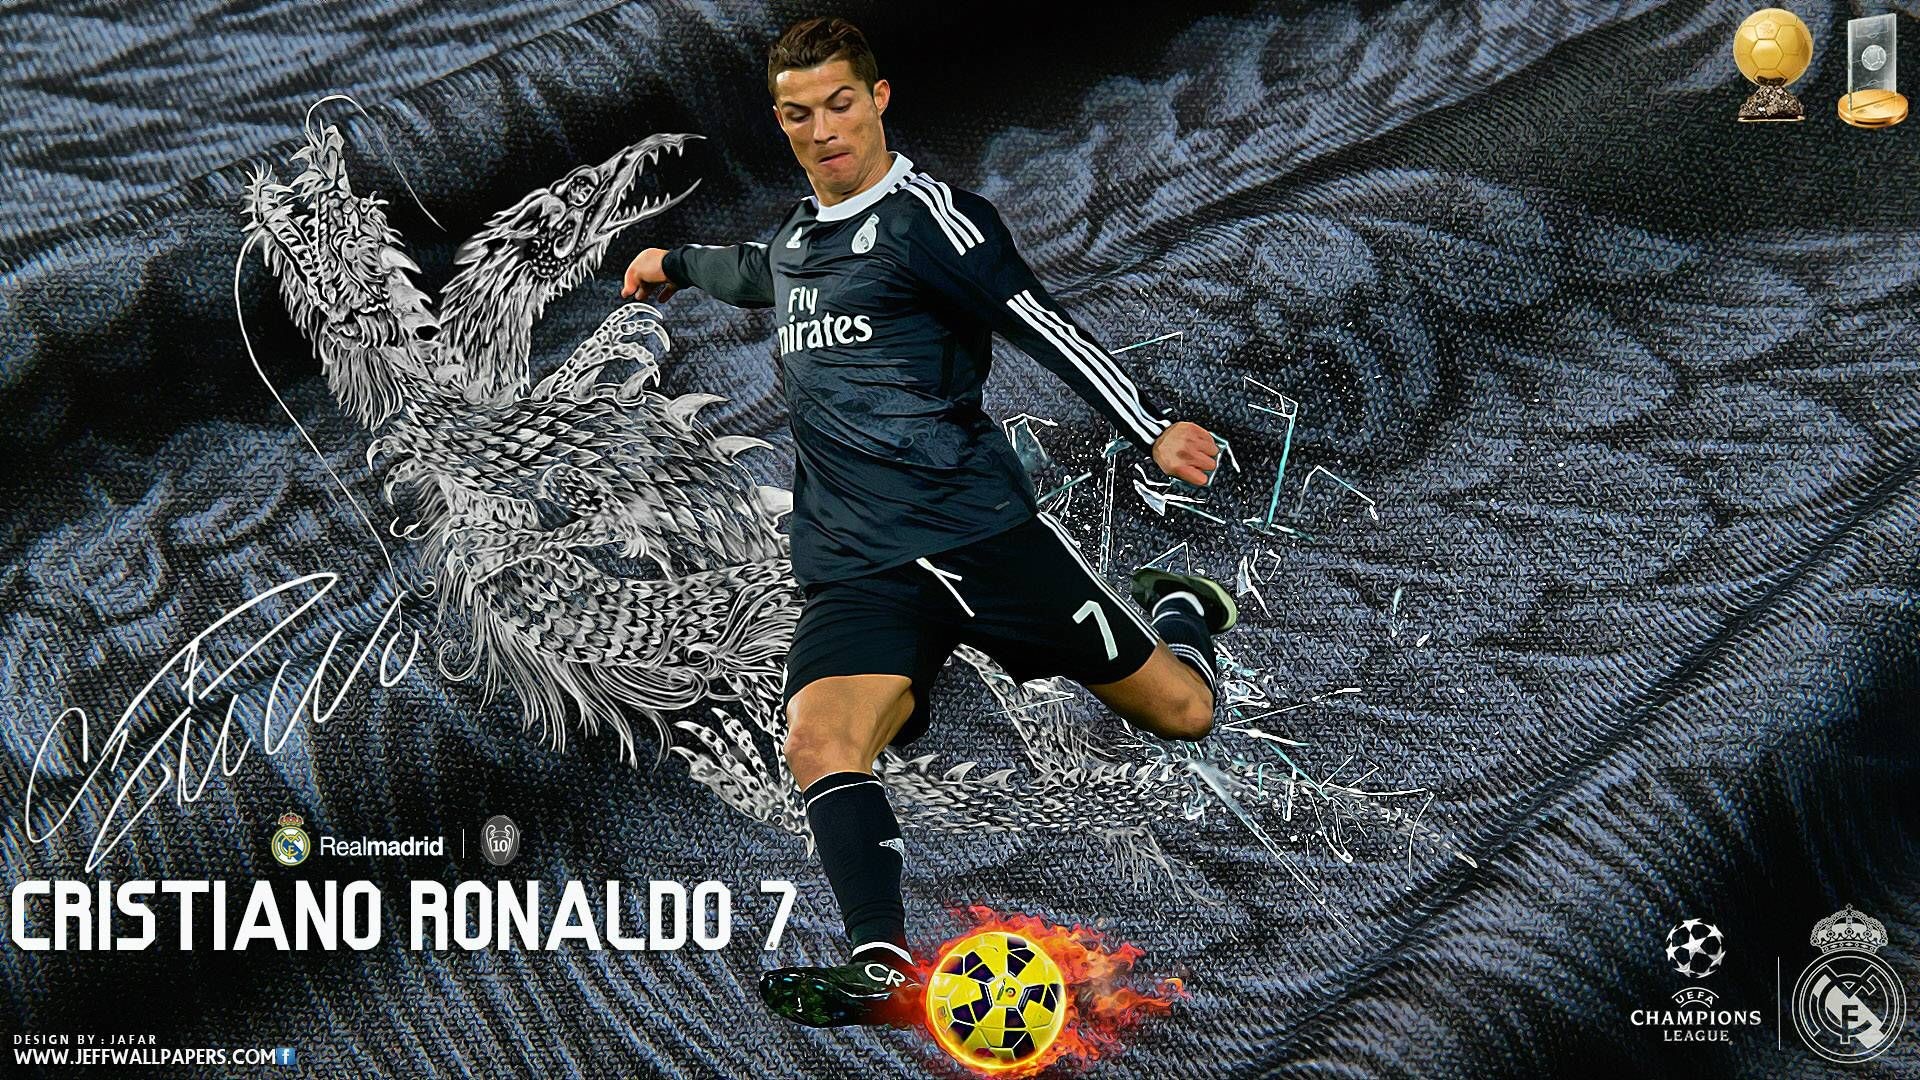 1920x1080 V.43 Cristiano Ronaldo HD, Full HD Images for PC & Mac, Tablet, Laptop,  Mobile